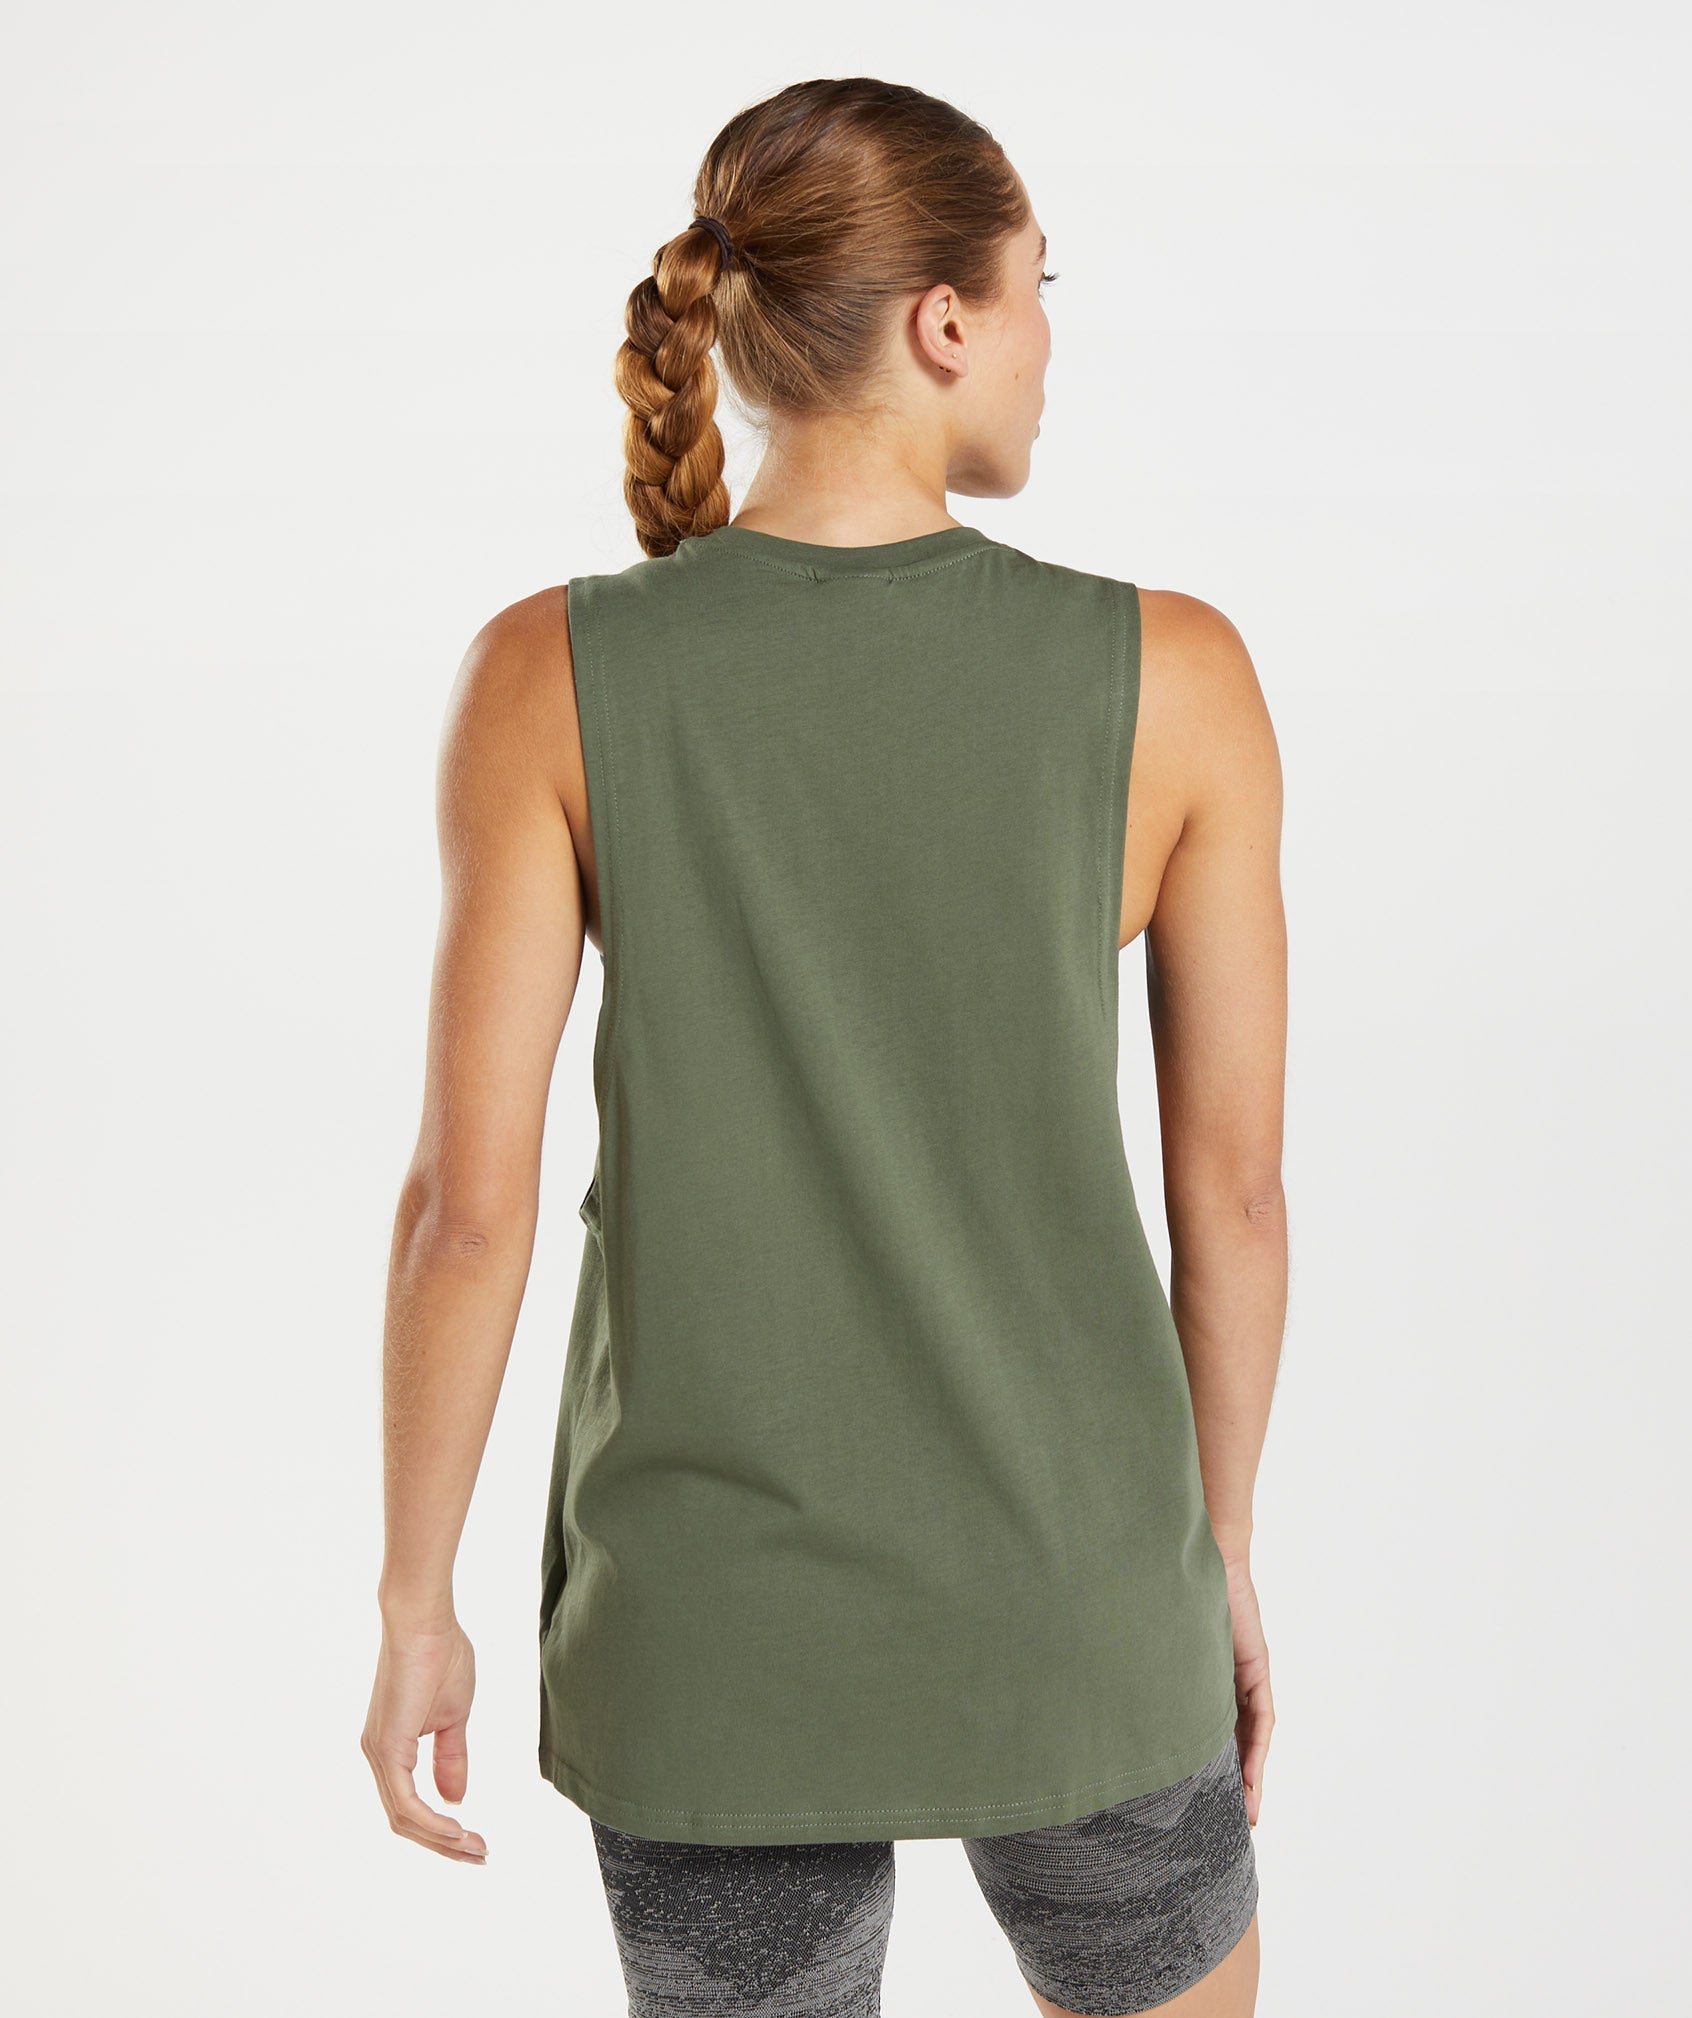 Training Drop Arm Tank in Core Olive - view 2